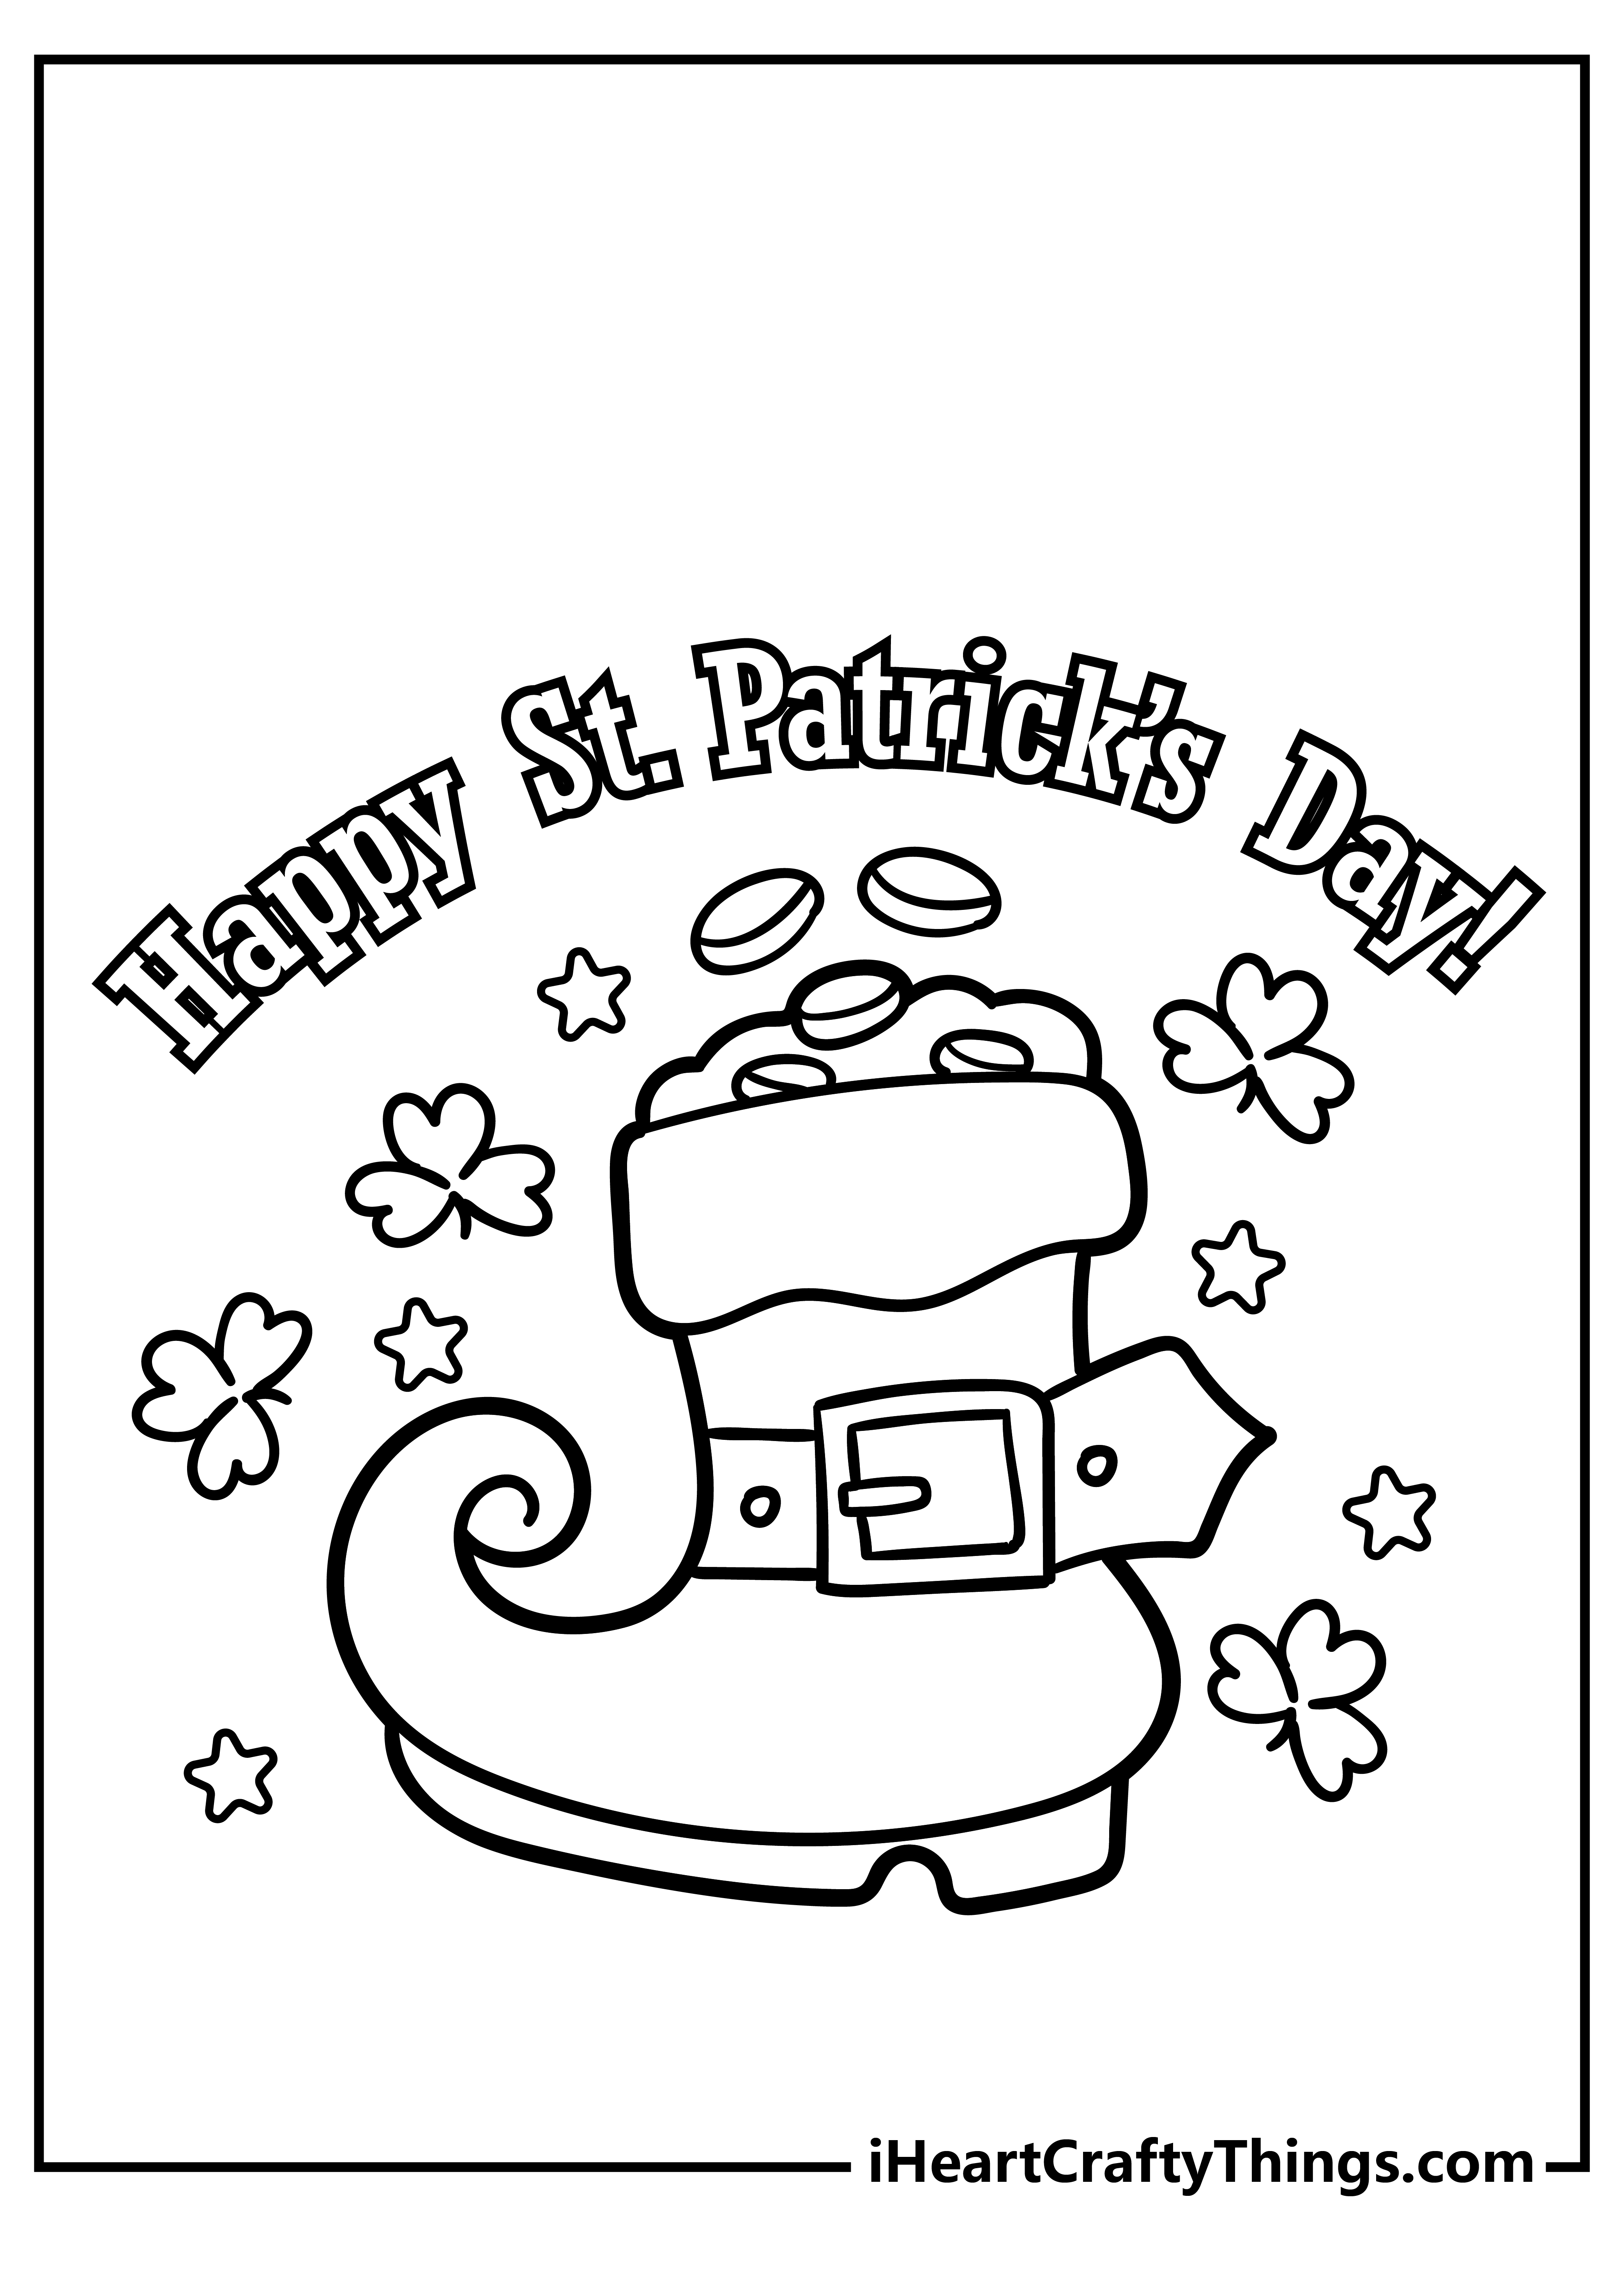 St Patrick’s Day Coloring Pages free pdf download